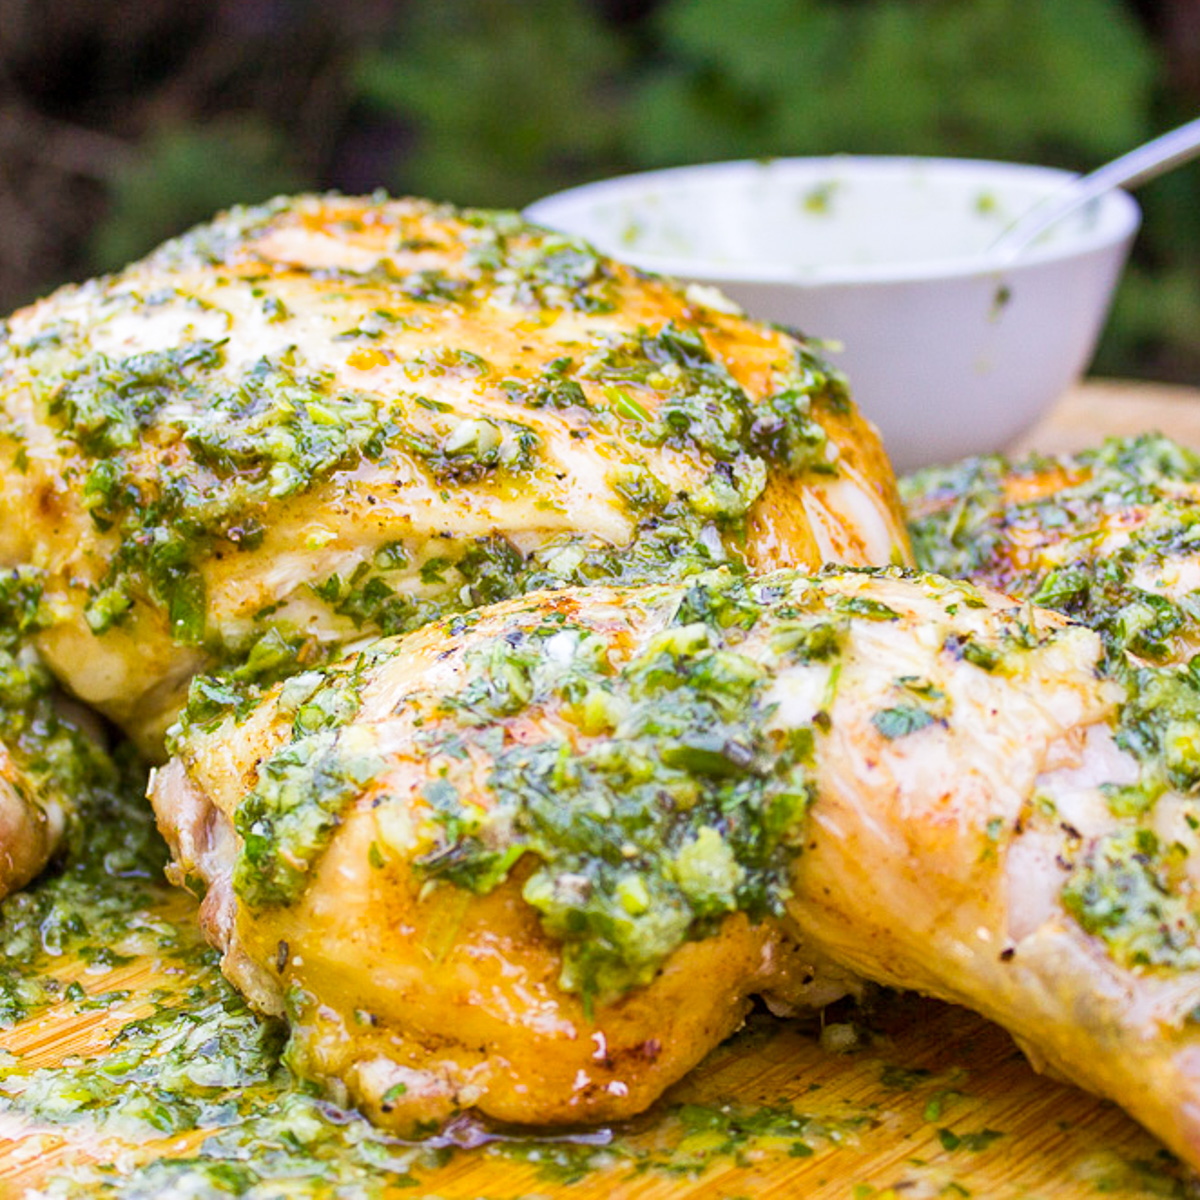 How to make herbal marinades for grilling